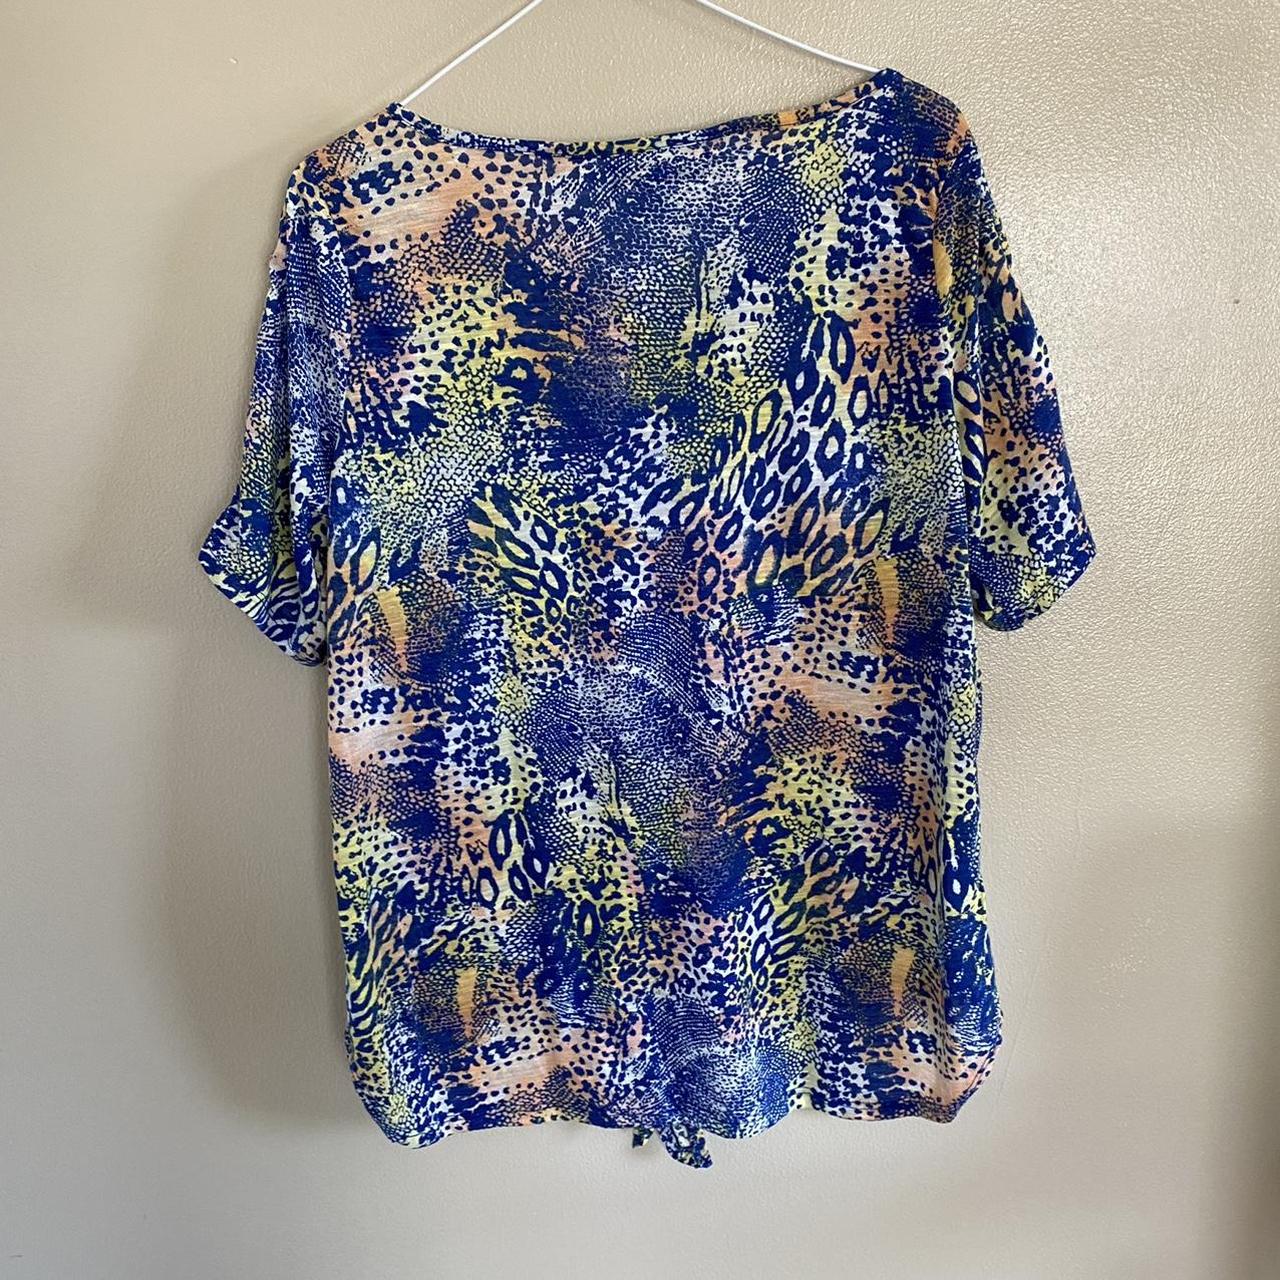 Product Image 4 - Multicolor Print Top by Goddess